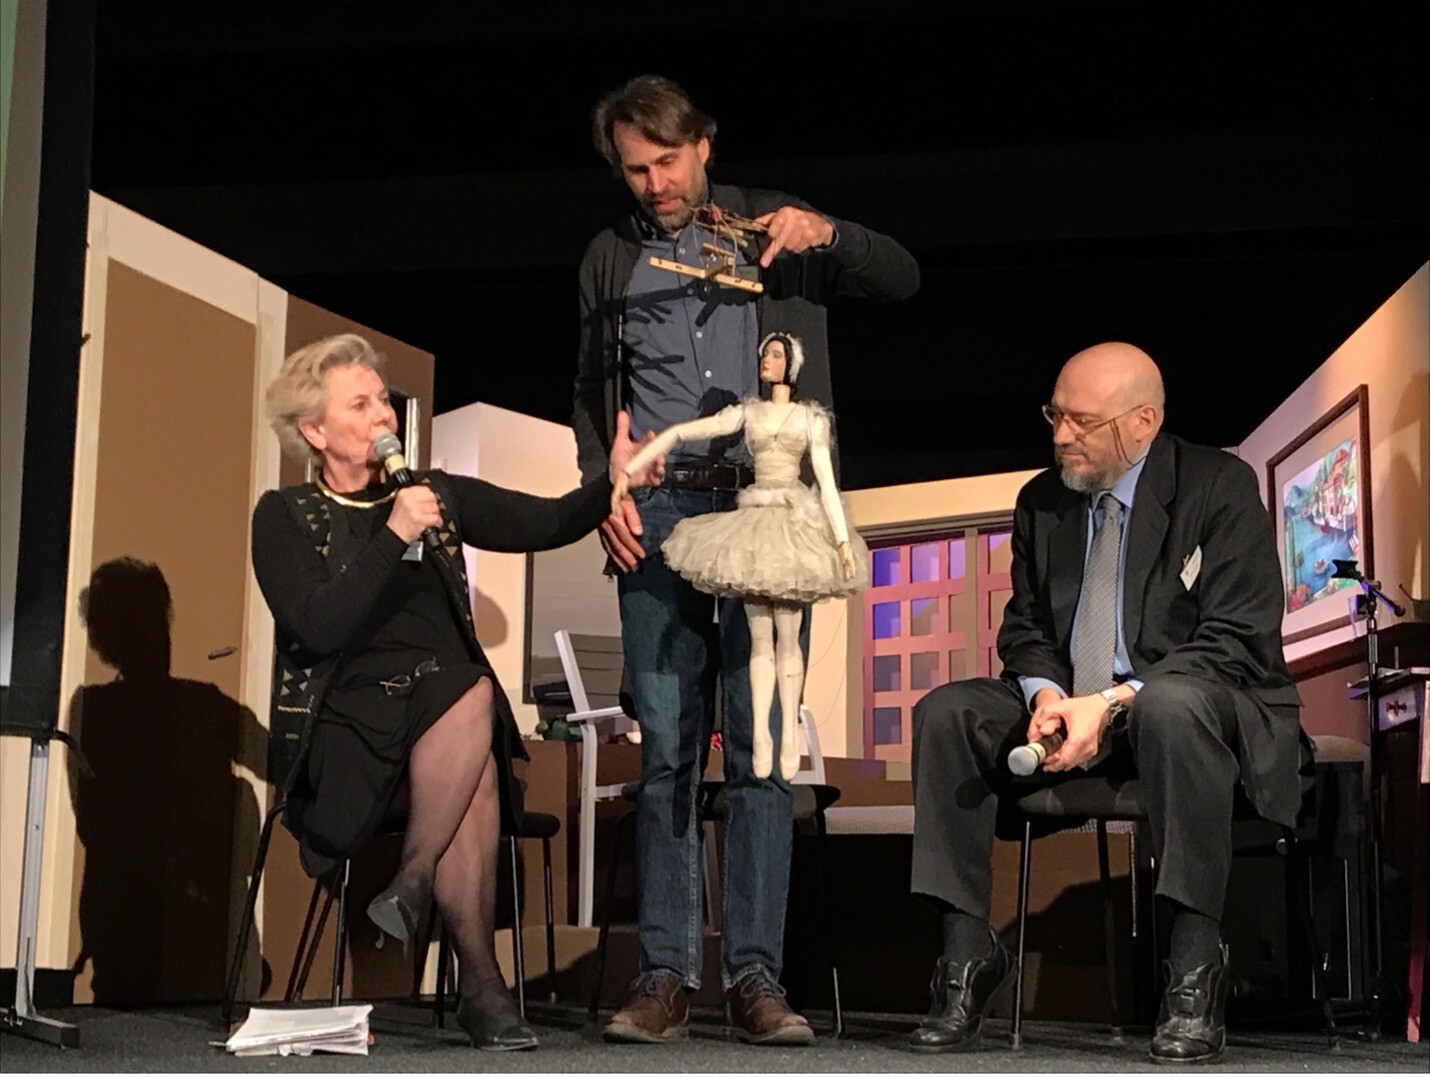 A presentation during the Puppet Theatre conference in Salzburg, Austria, 2020. Philippe Brunner (center), director of the Salzburg Marionette Theatre, displays one of the oldest puppets in the company’s collection, while Barabara Heuberger (left) describes the figure’s history and significance, joined onstage by Piero Corbella (right).